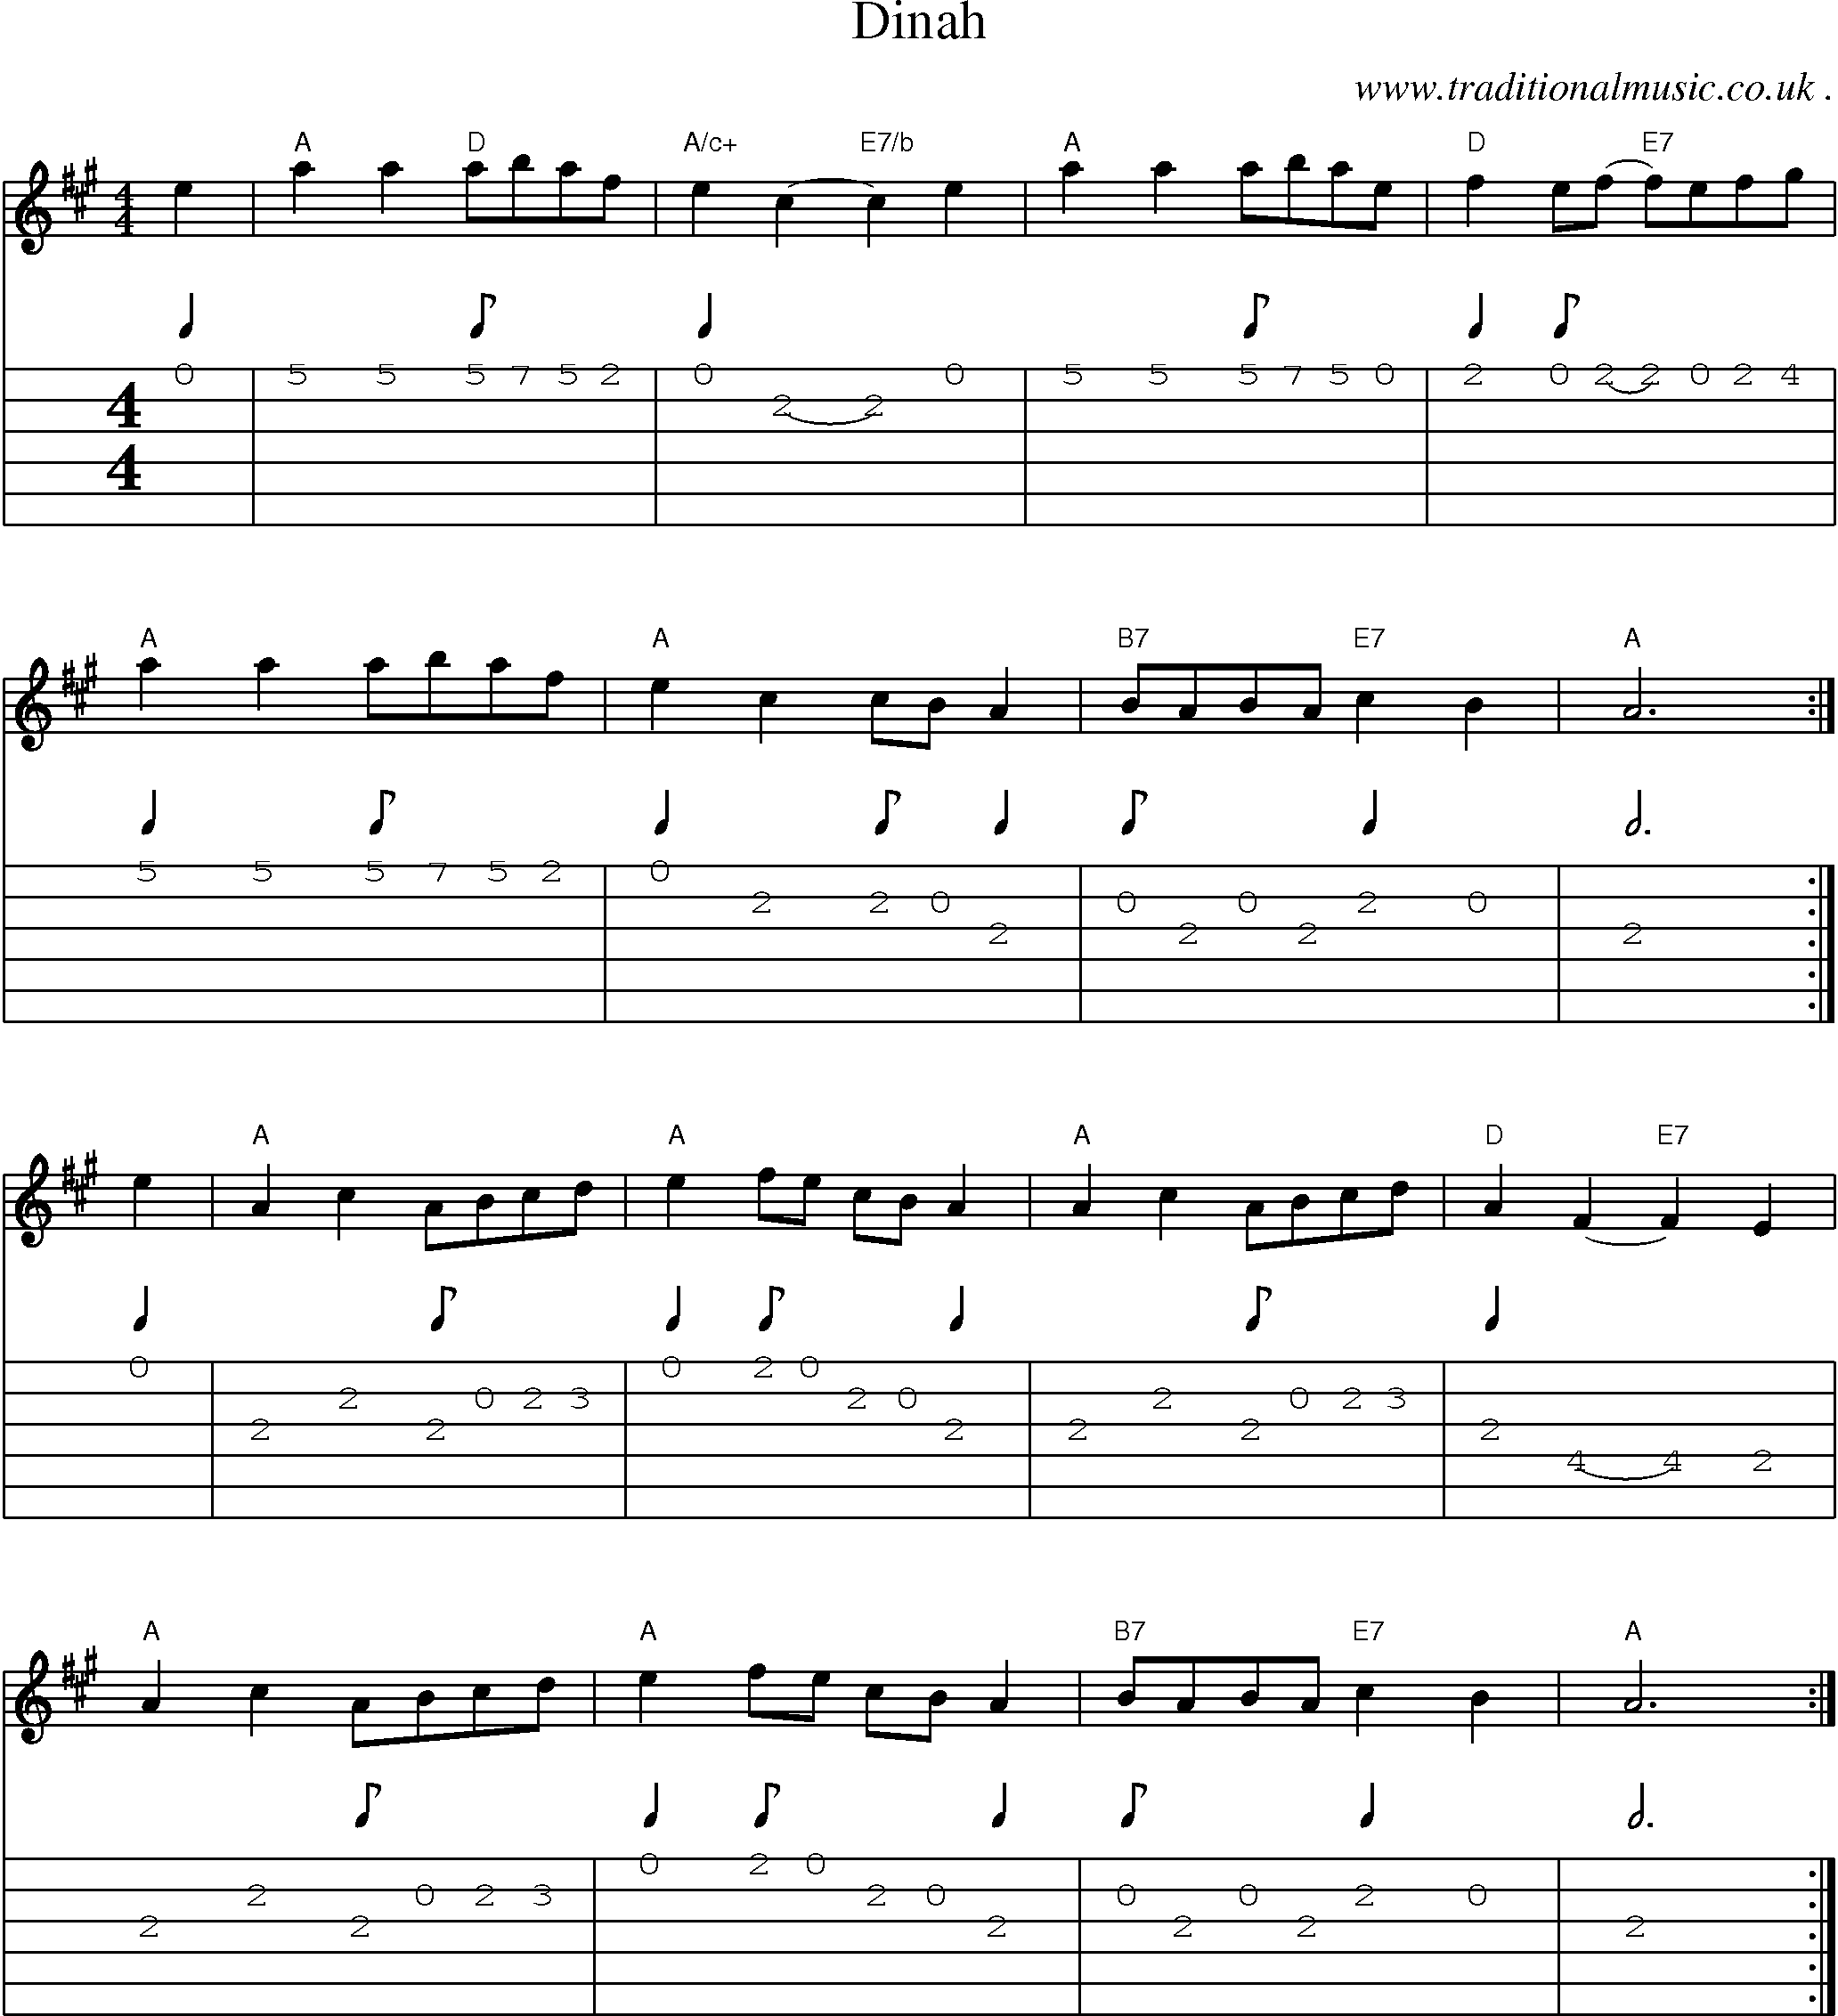 Sheet-Music and Guitar Tabs for Dinah